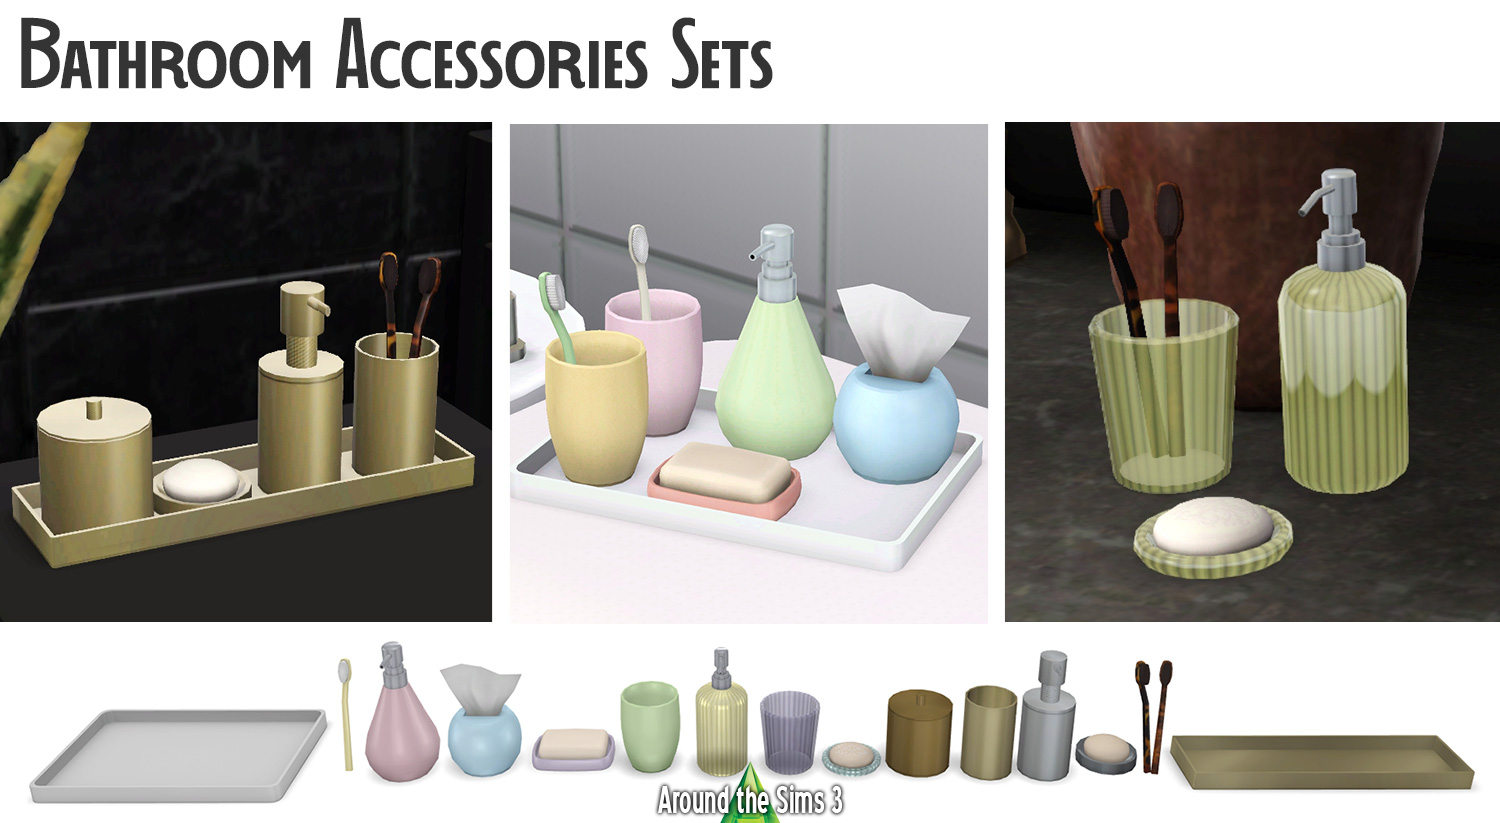 https://aroundthesims3.com/objects/images/bathroom_accessoriessets/prevue_s3.jpg